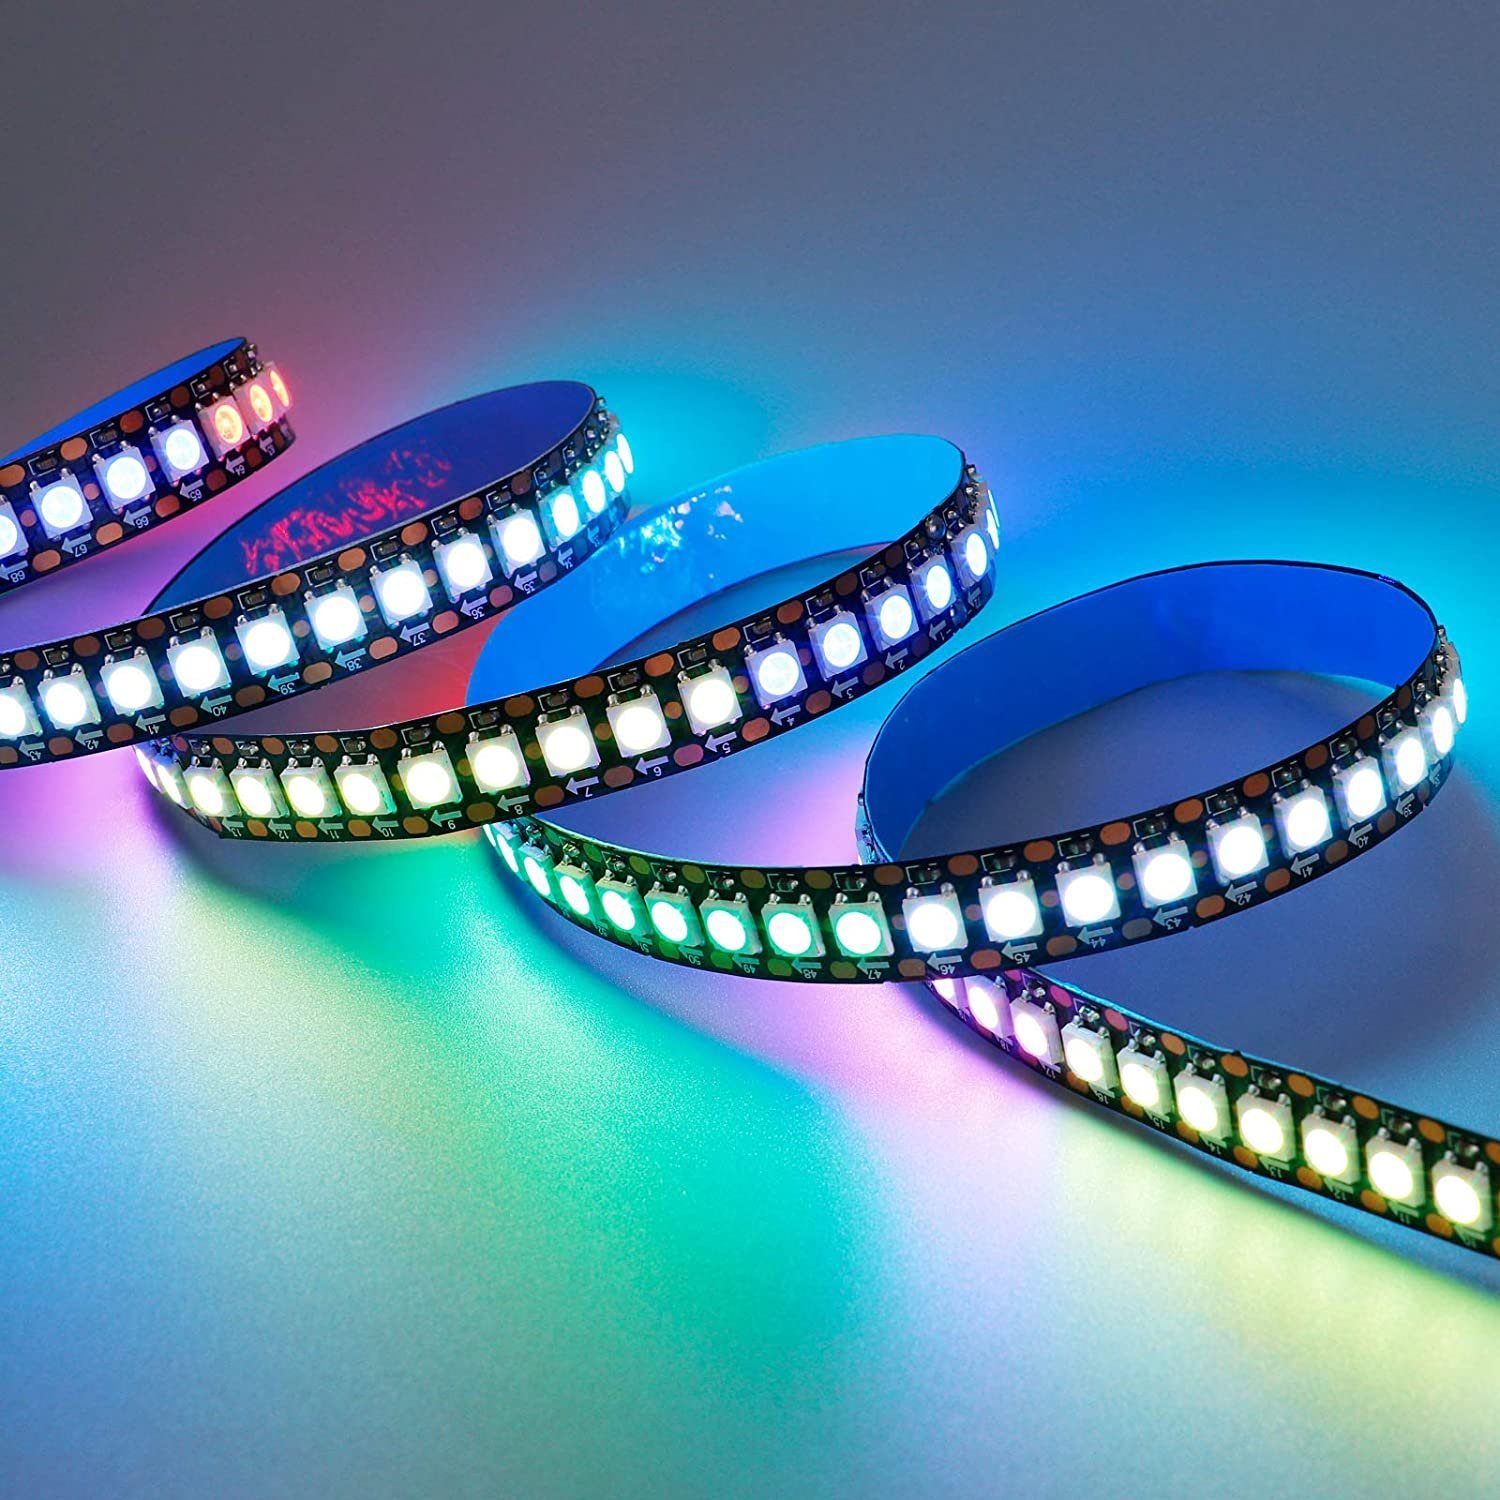 WS2812B Non-Waterproof 144 LED/M Addressable Pixel Strip for Arduino 1  METER - roboway